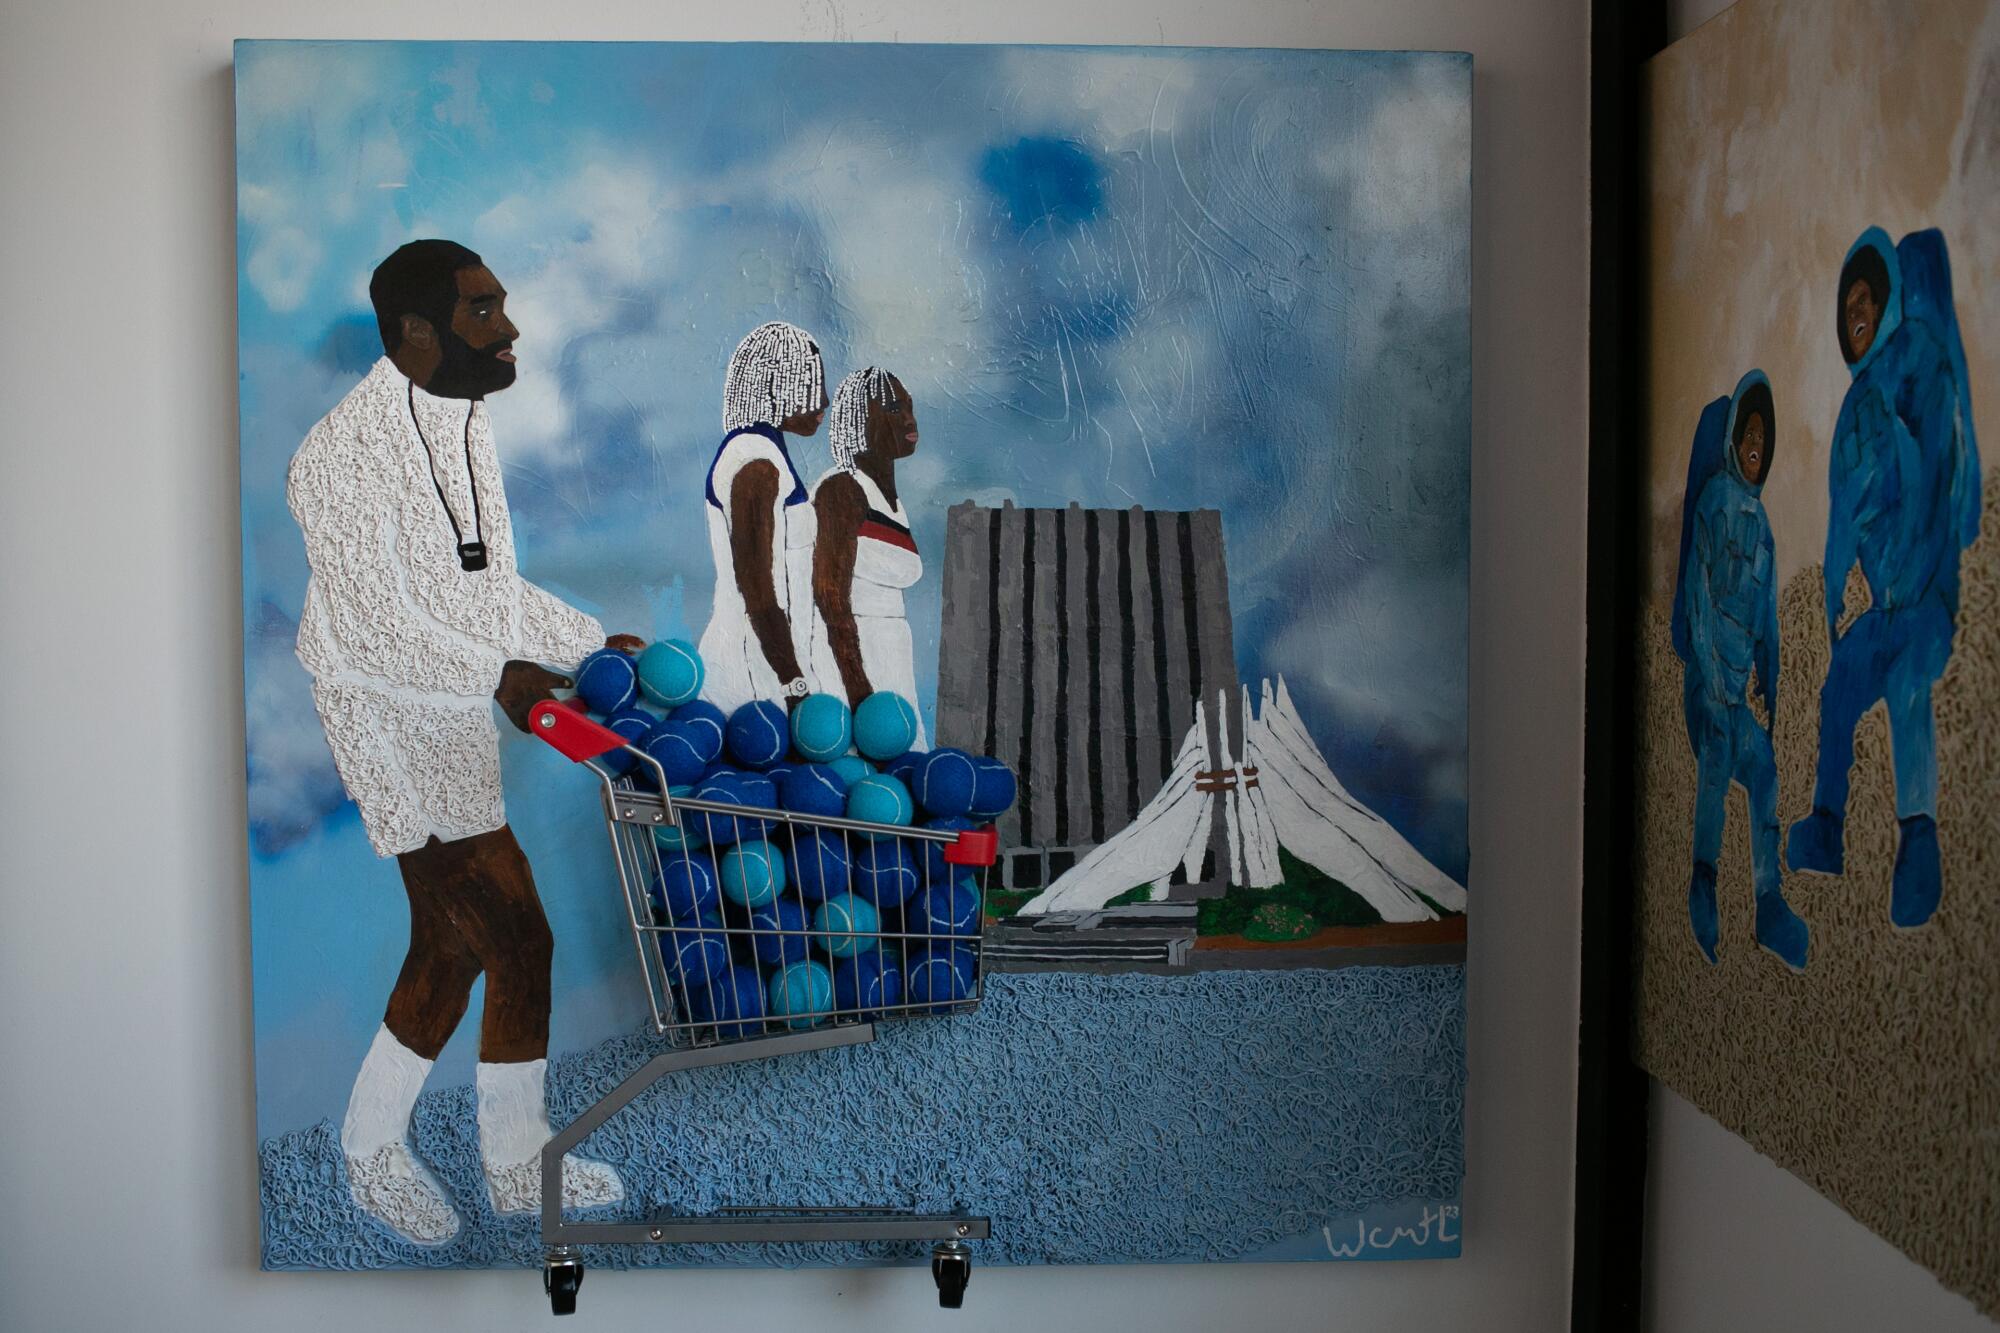  A multimedia art piece depicts tennis coach Richard Williams and his tennis star daughters Venus and Serena